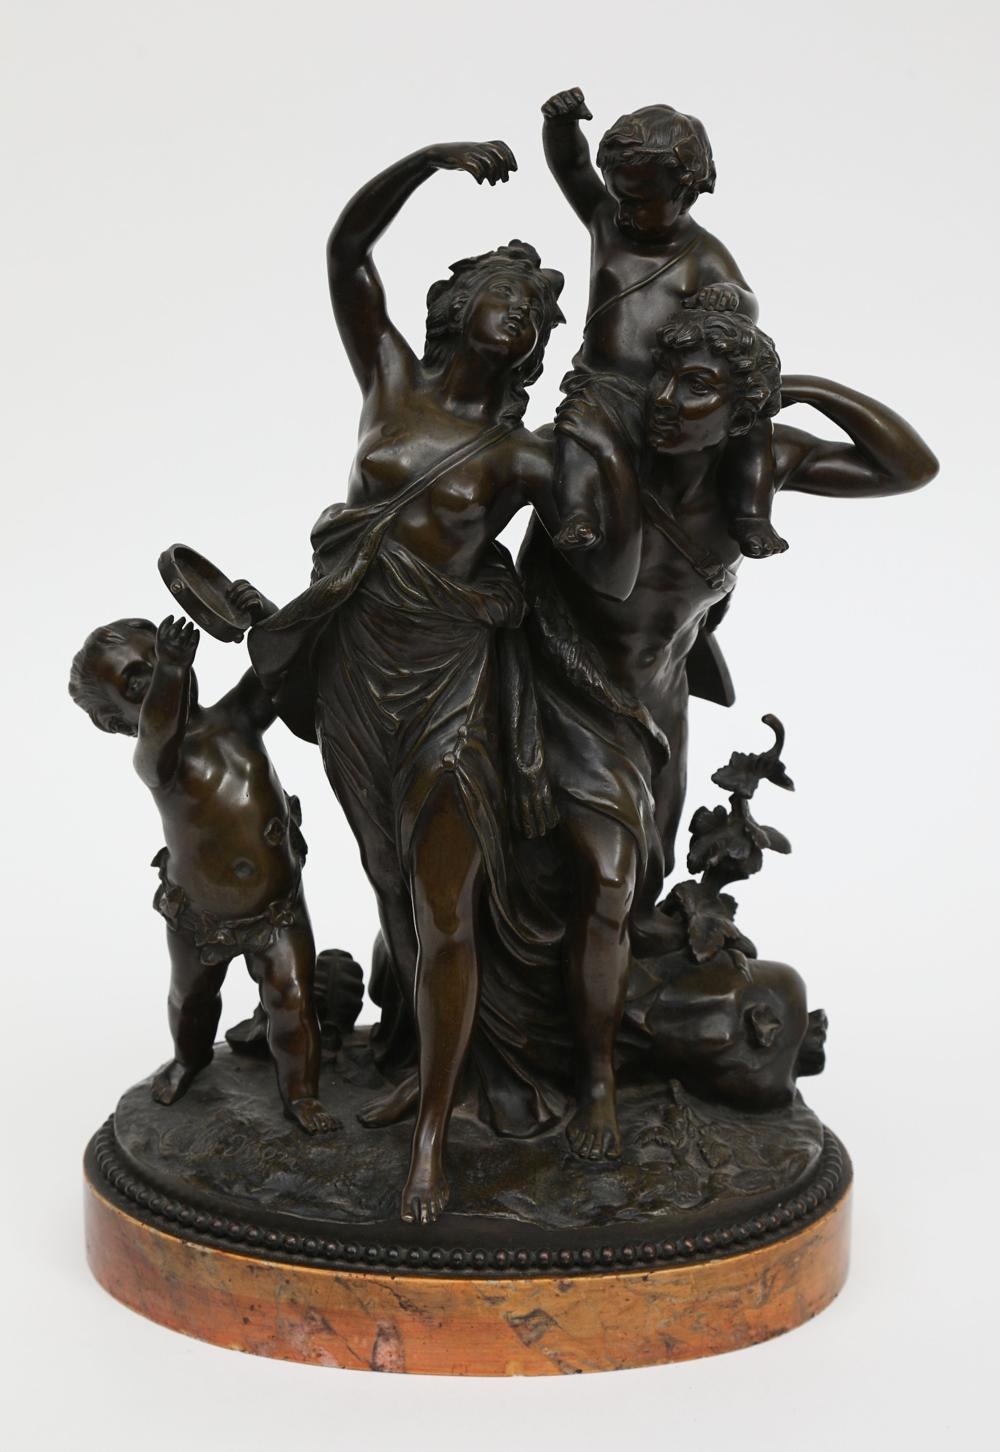 Claude Michael Clodion. 1738-1814. The triumph of Bacchus. A detailed bronze group supported on marble base. Signed Clodion. H 42cm, W 27cm - Claude Michel Clodion